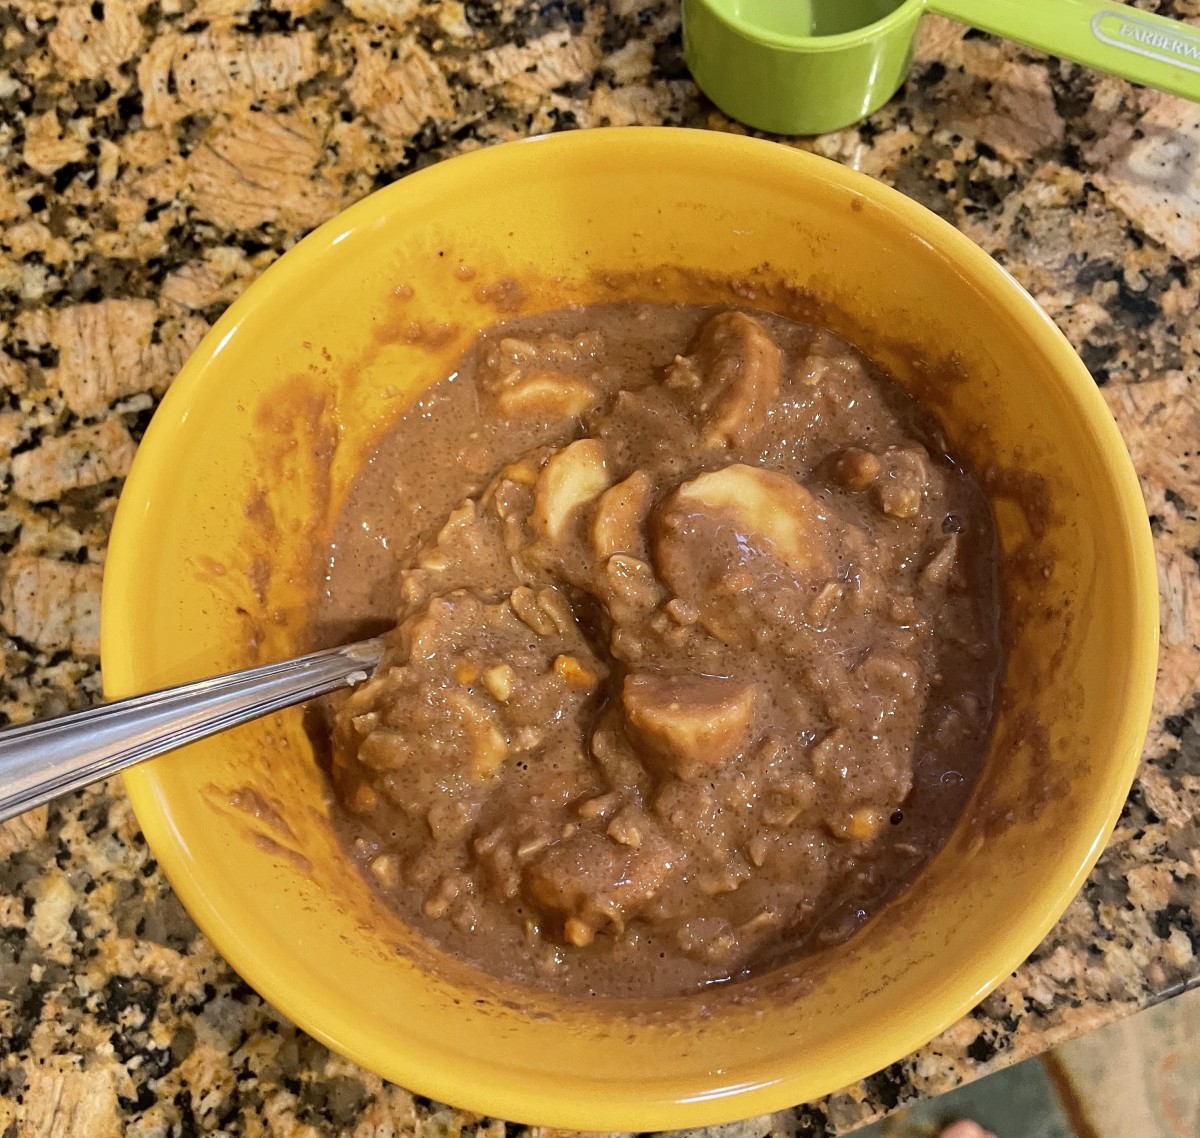 This yummy breakfast combines chocolate, peanut butter, banana, oatmeal, and Malt-O-Meal in one yummy (and healthy!) breakfast bowl...